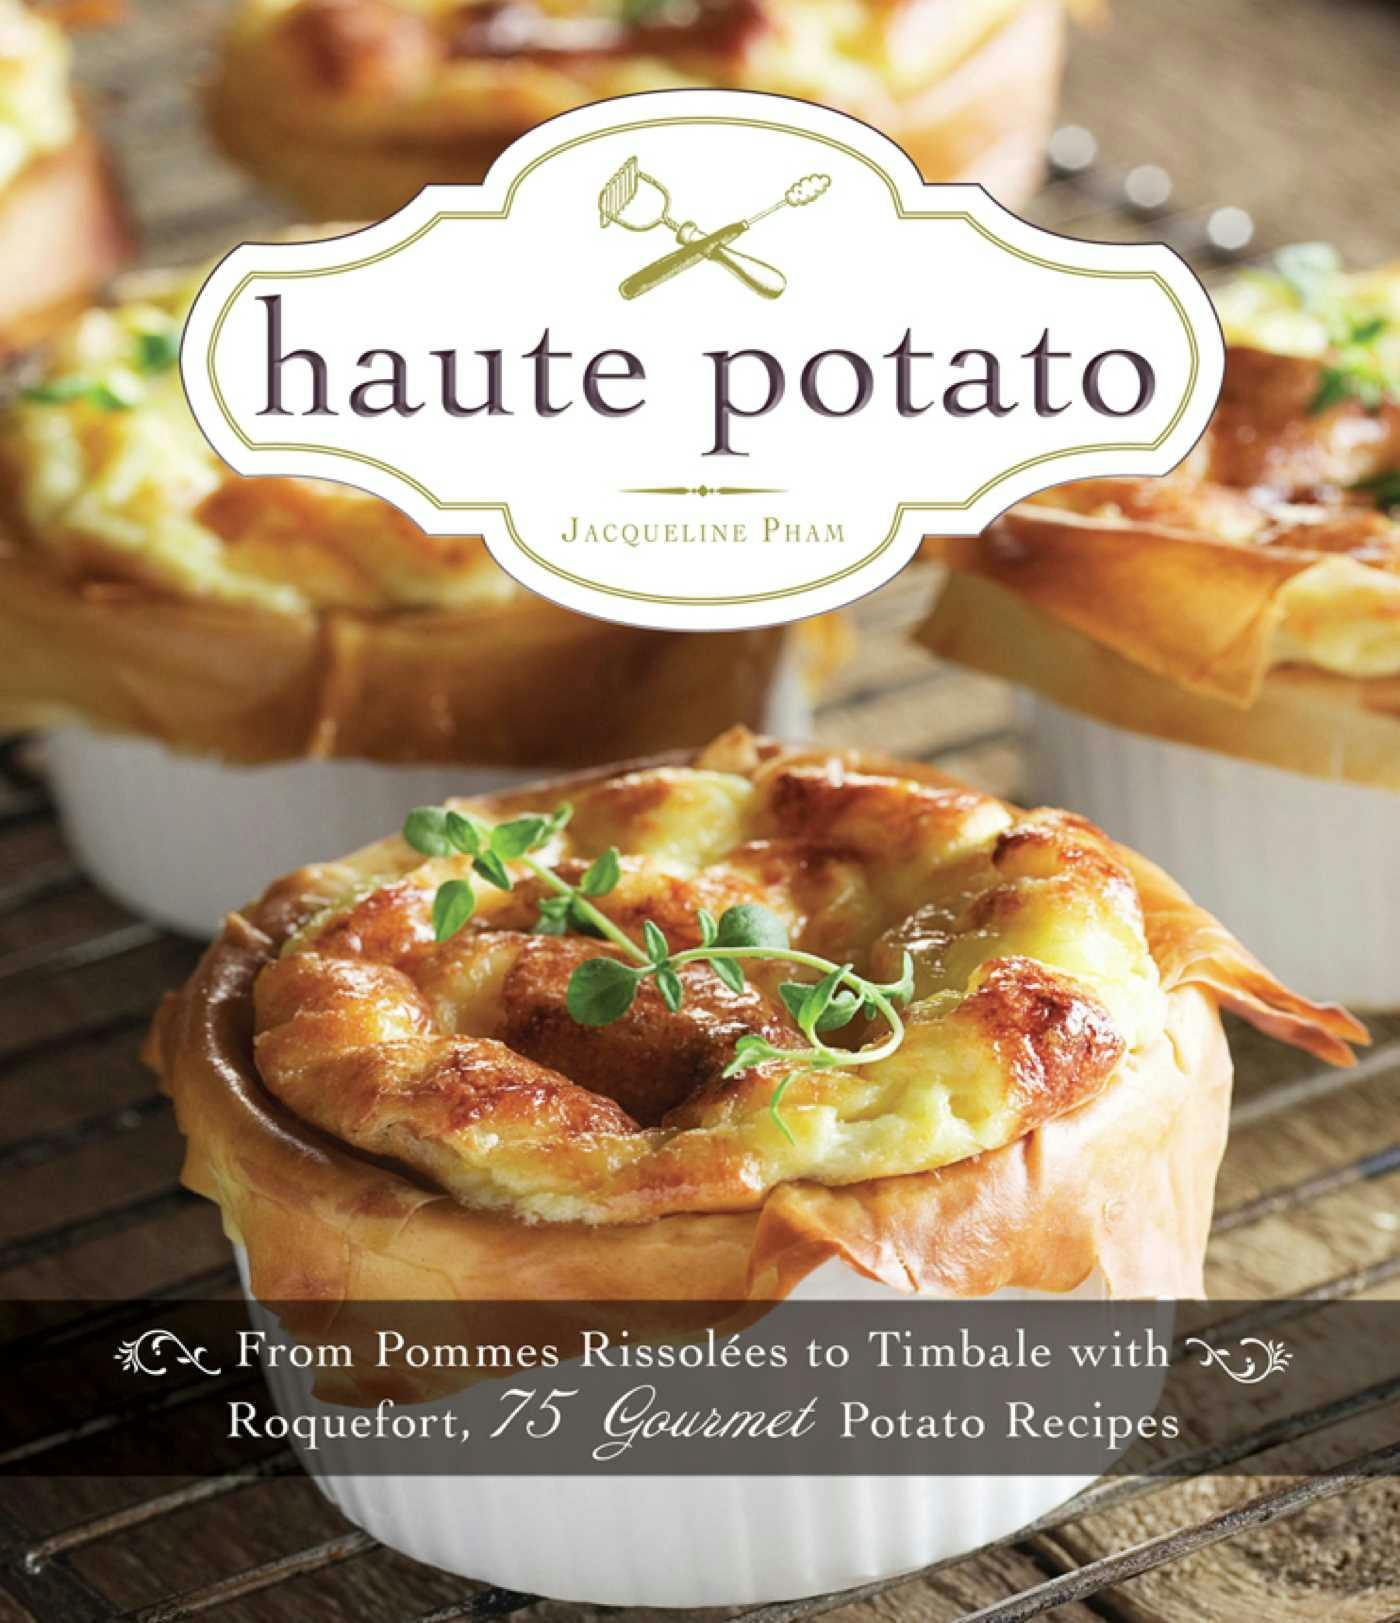 Haute Potato: From Pommes Rissolees to Timbale with Roquefort, 75 Gourmet Potato Recipes - Jacqueline Pham